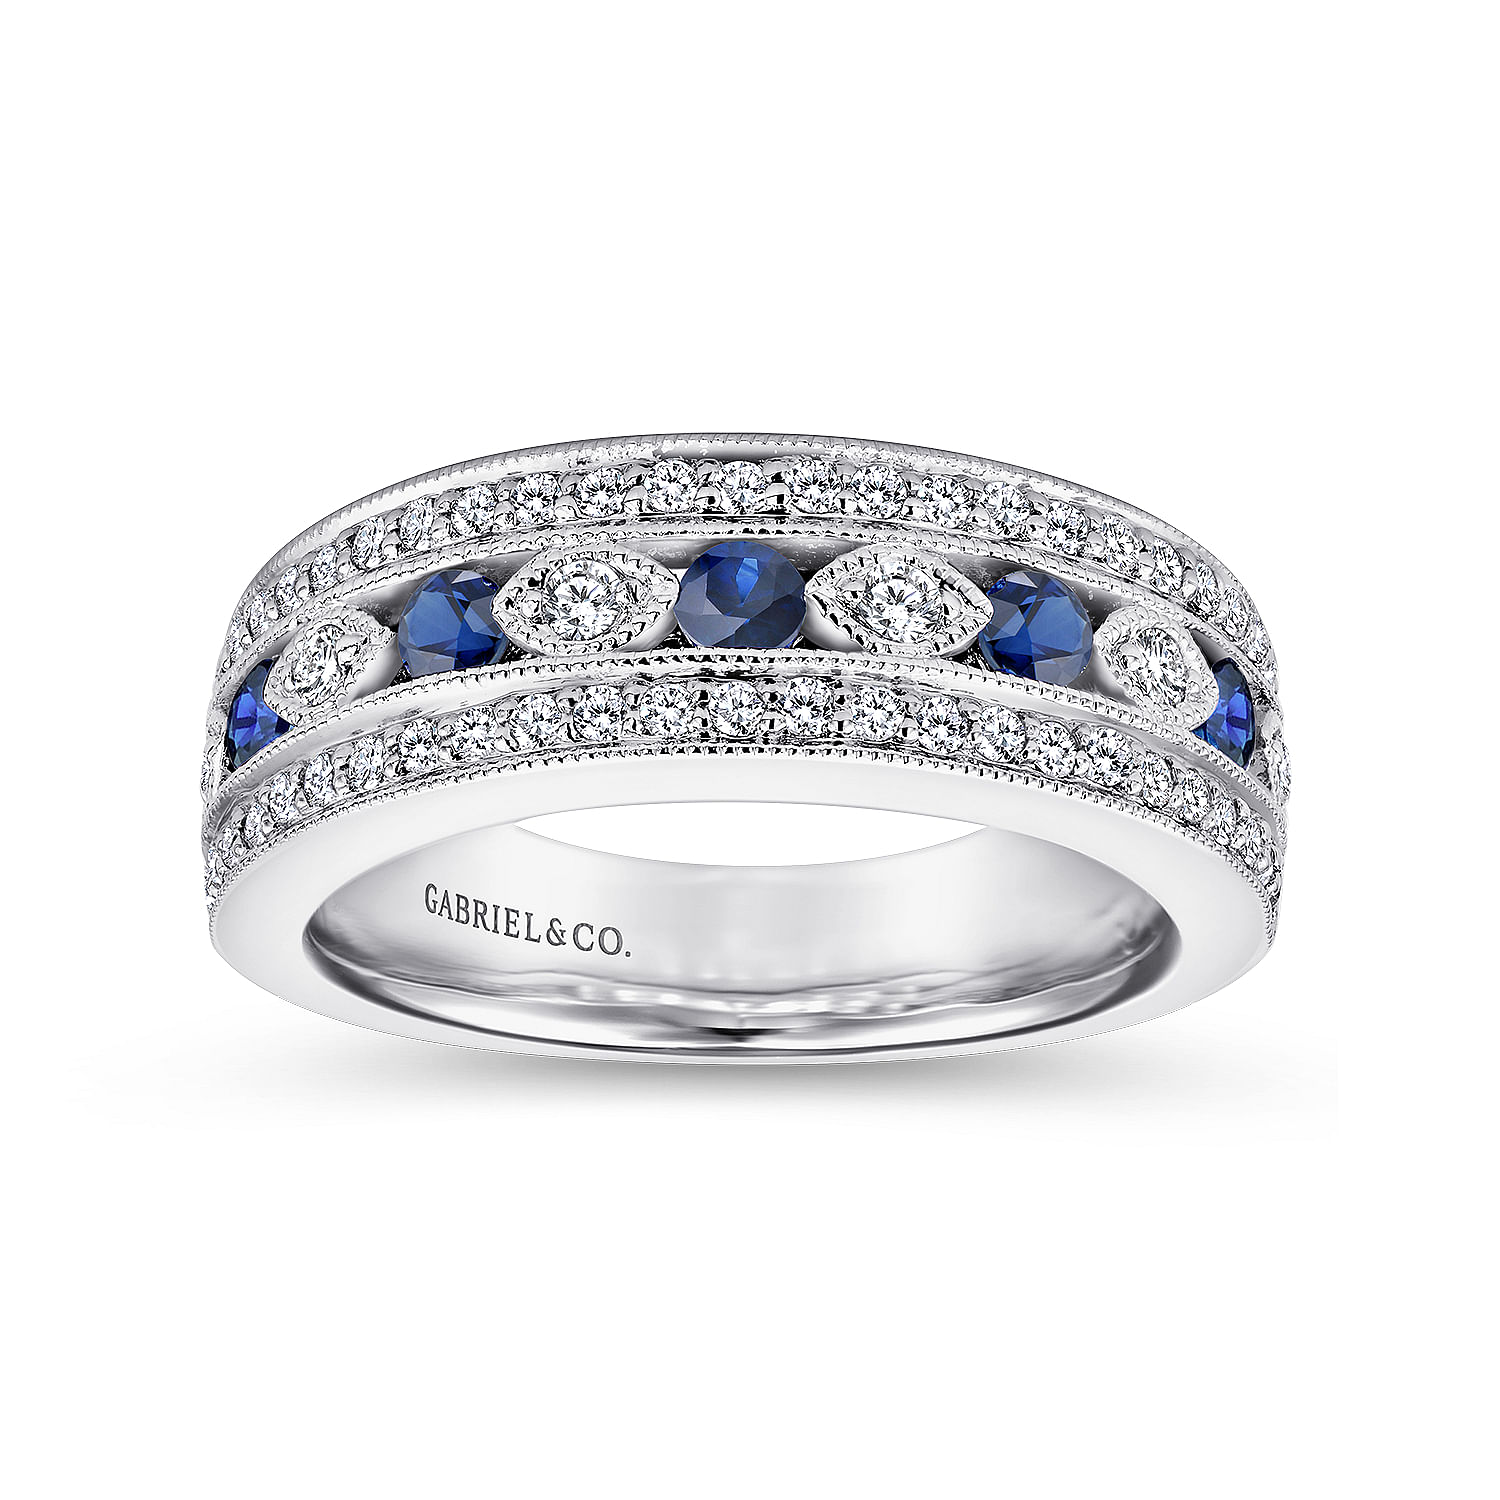 14K White Gold Vintage Inspired Sapphire and Diamond Ring - 0.4 ct - Shot 4